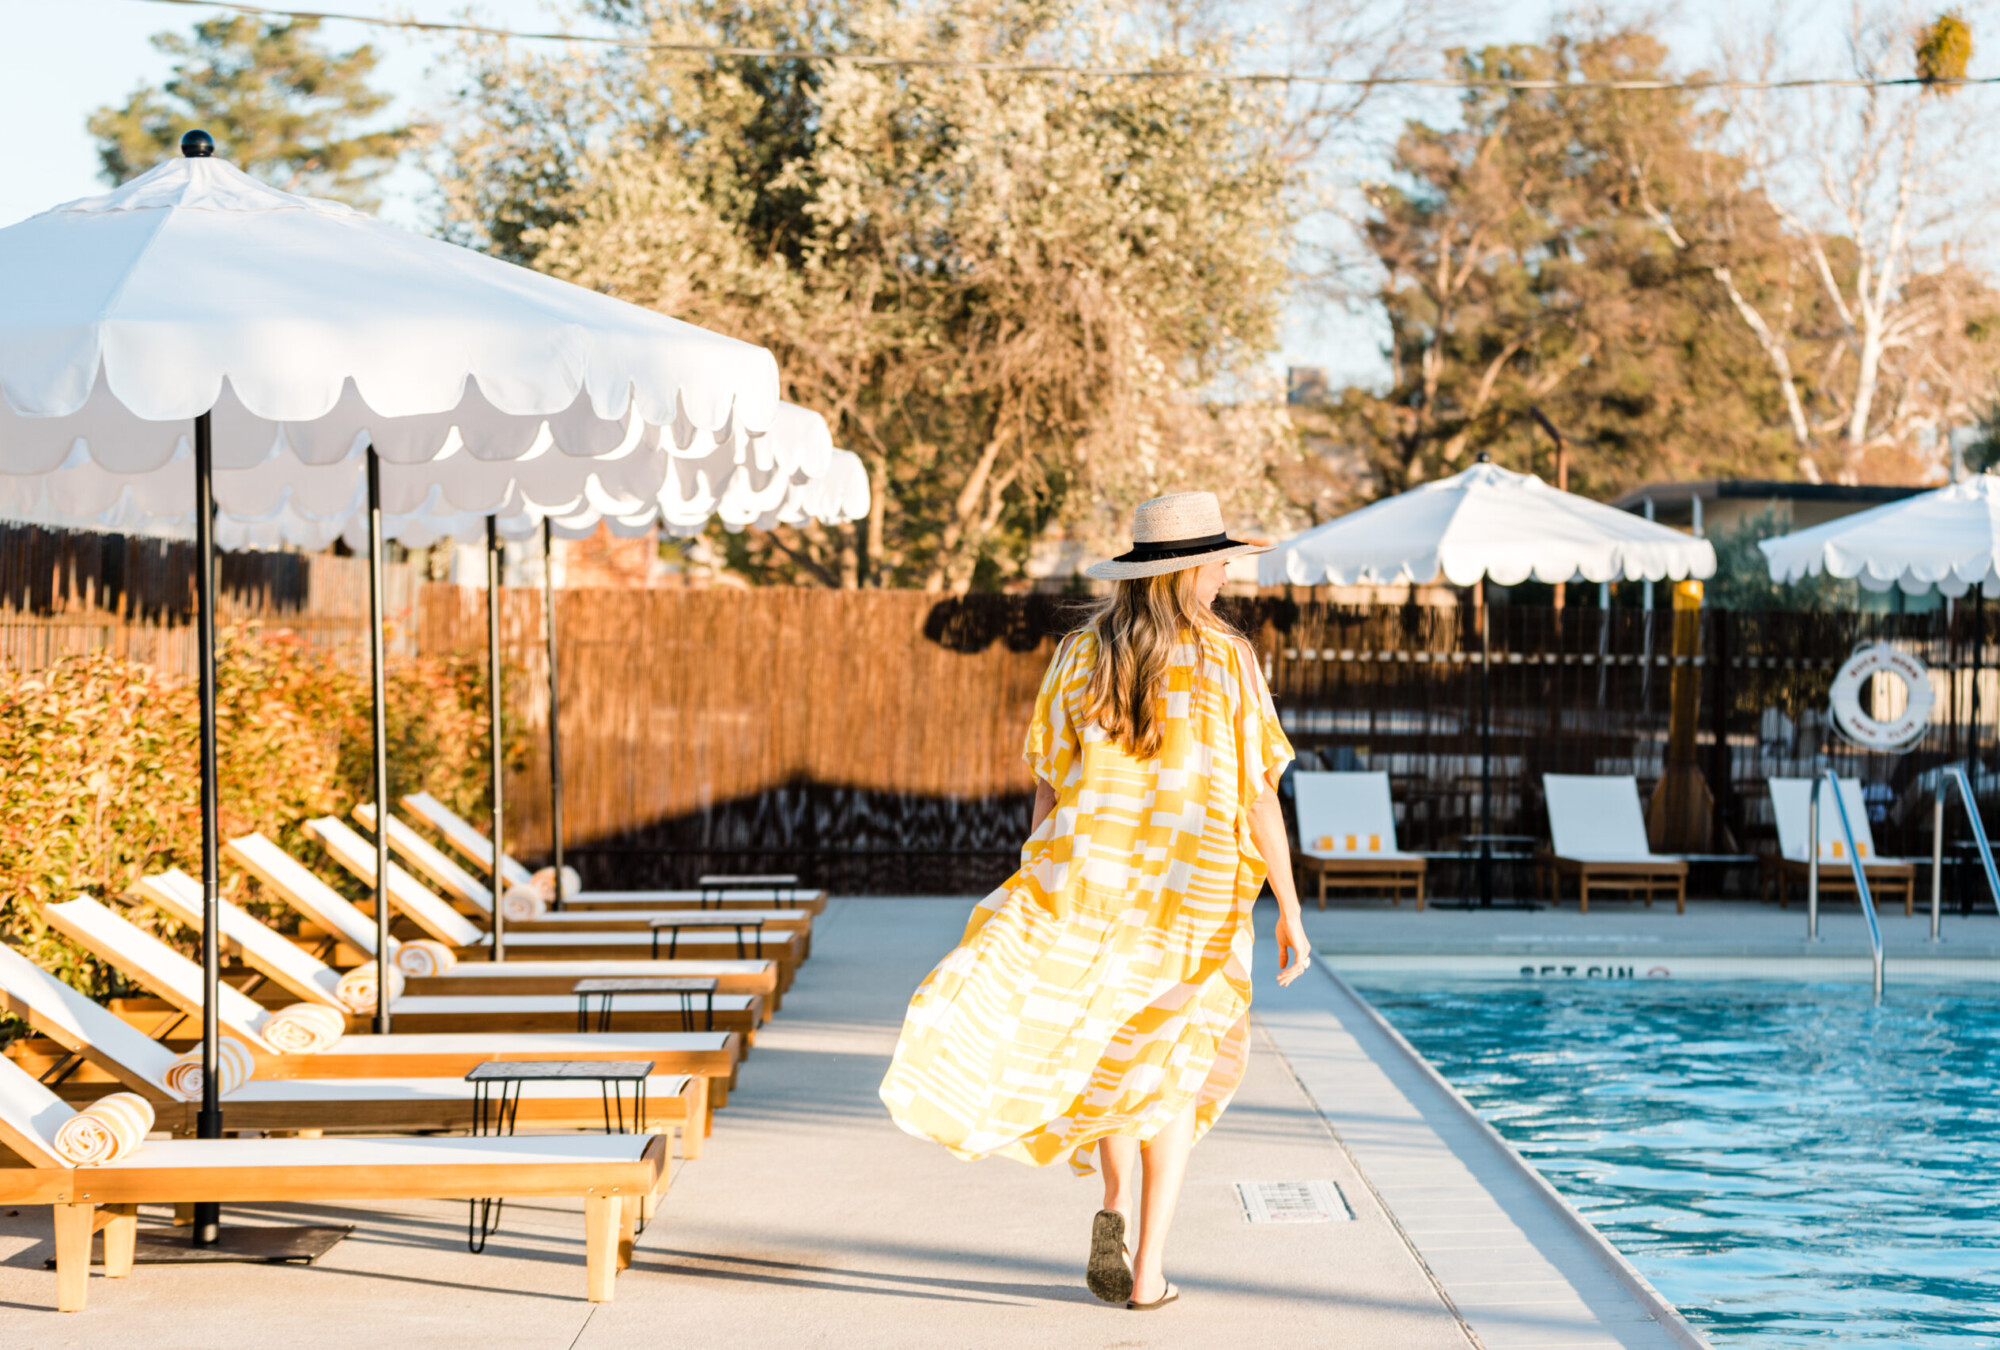 View of a woman walking next to pool loungers and white shade umbrellas a the Cuyama Buckhorn's pool in New Cuyama, California.